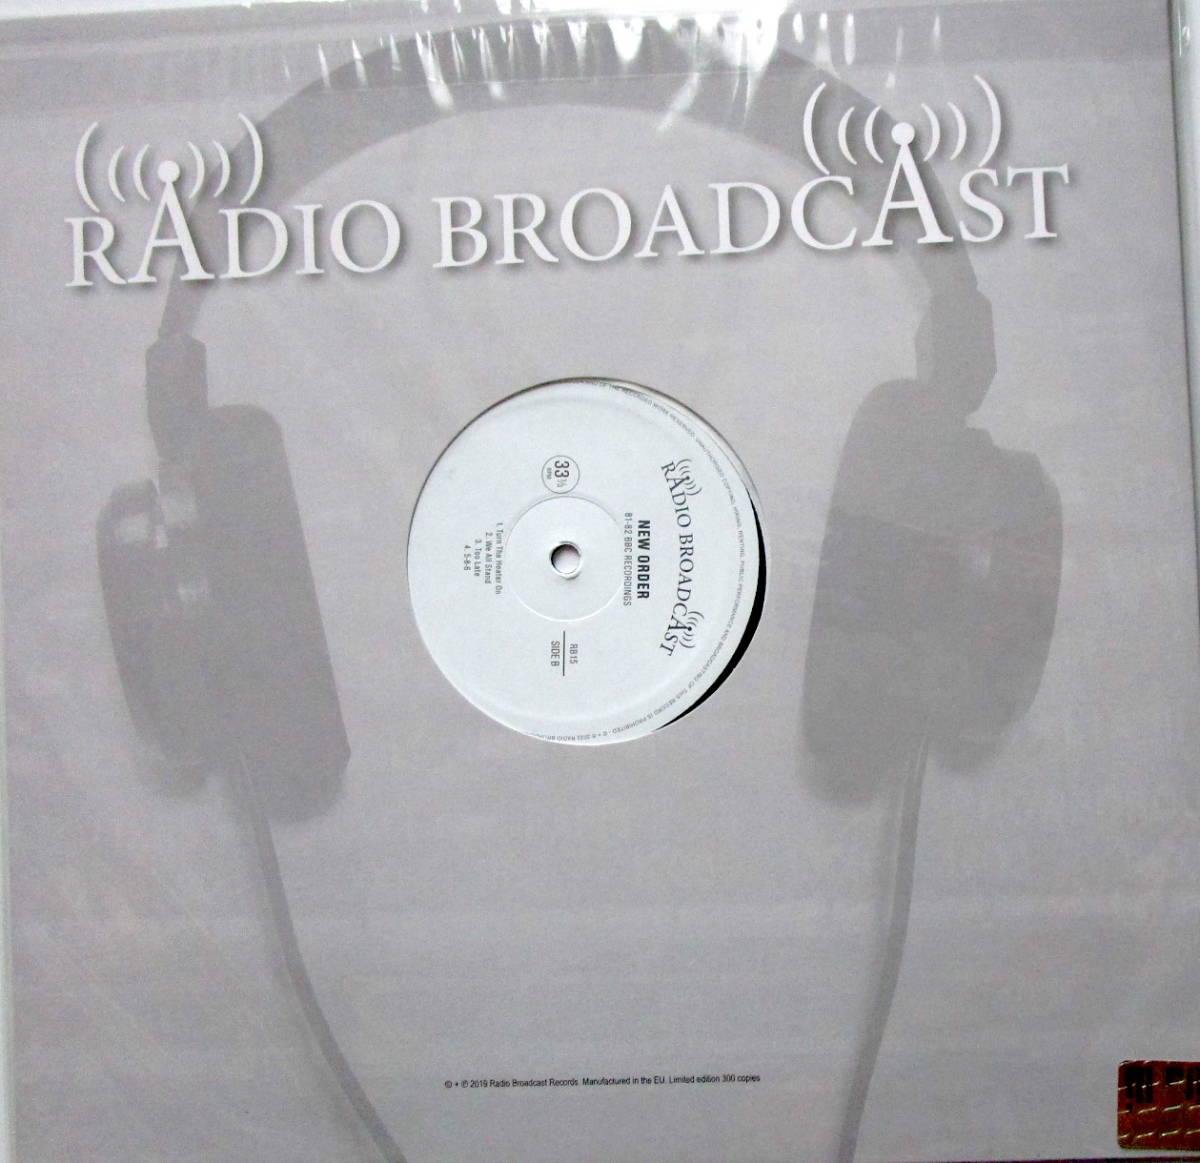 New Order Radio Broadcast 81-82 BBC Recordings LP Limited Edition 300 Joy Division/Warsaw/ new order /80s UK New Wave Synth